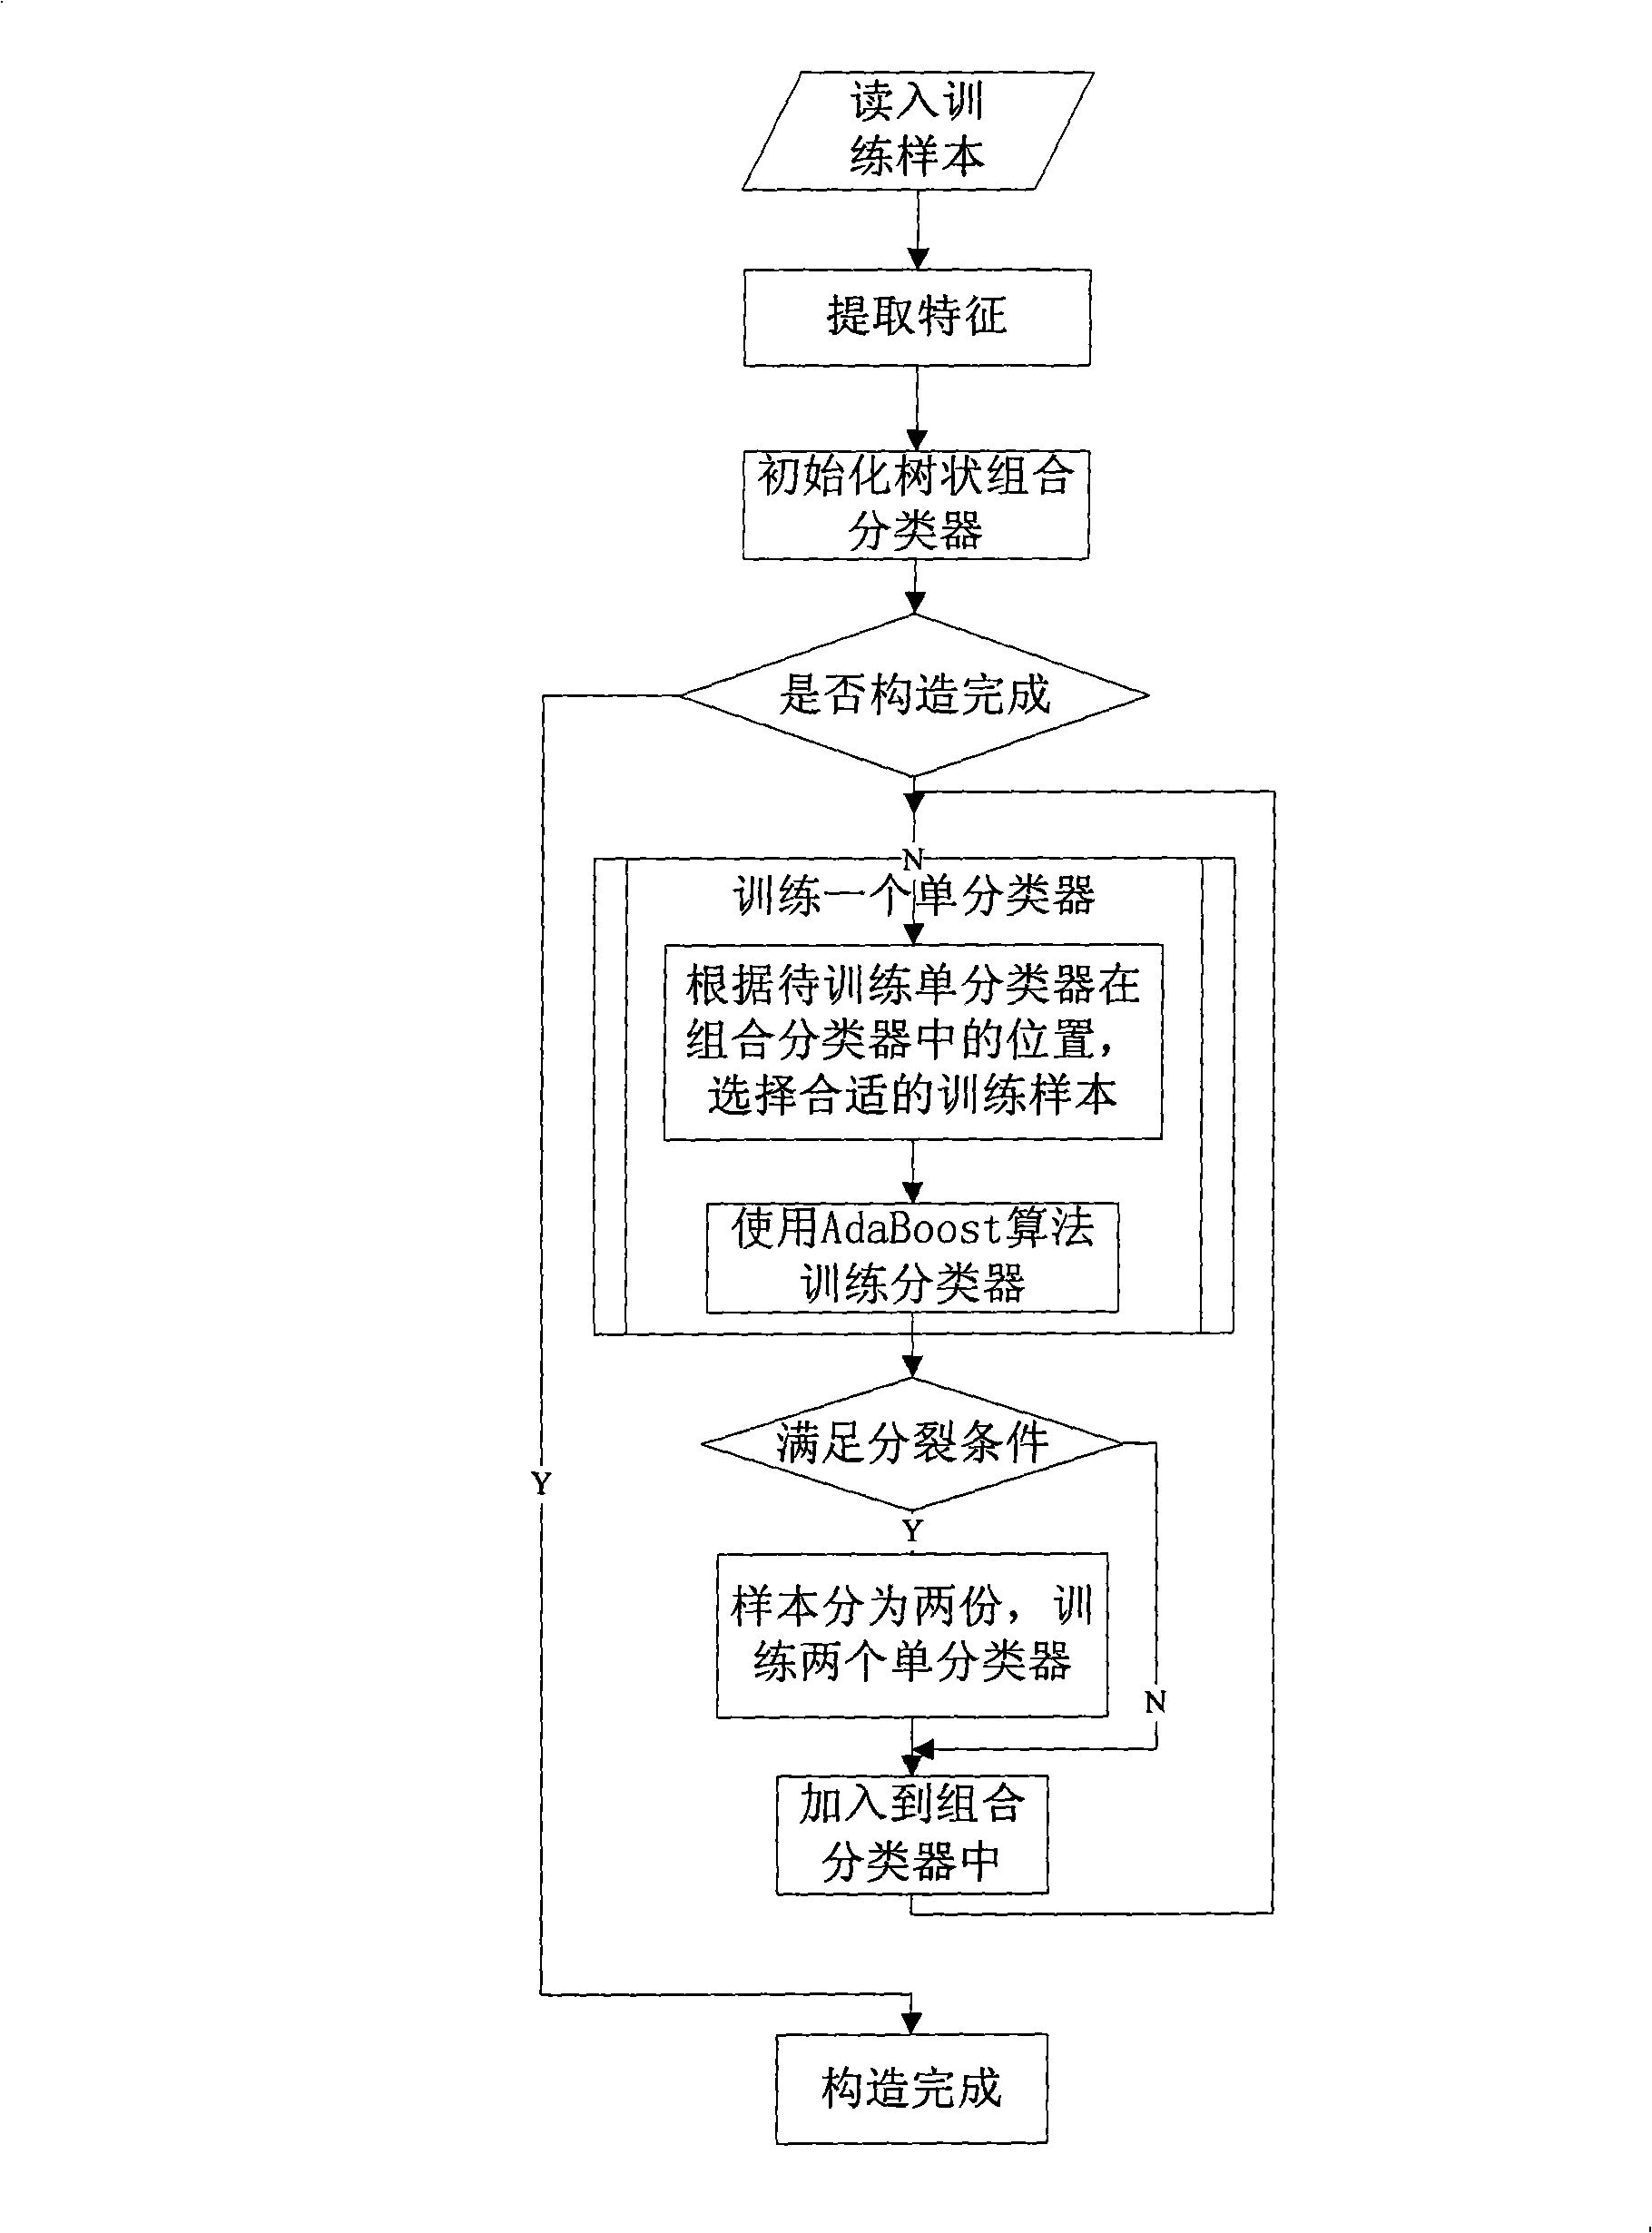 Tree-shaped assembled classification method for pedestrian detection